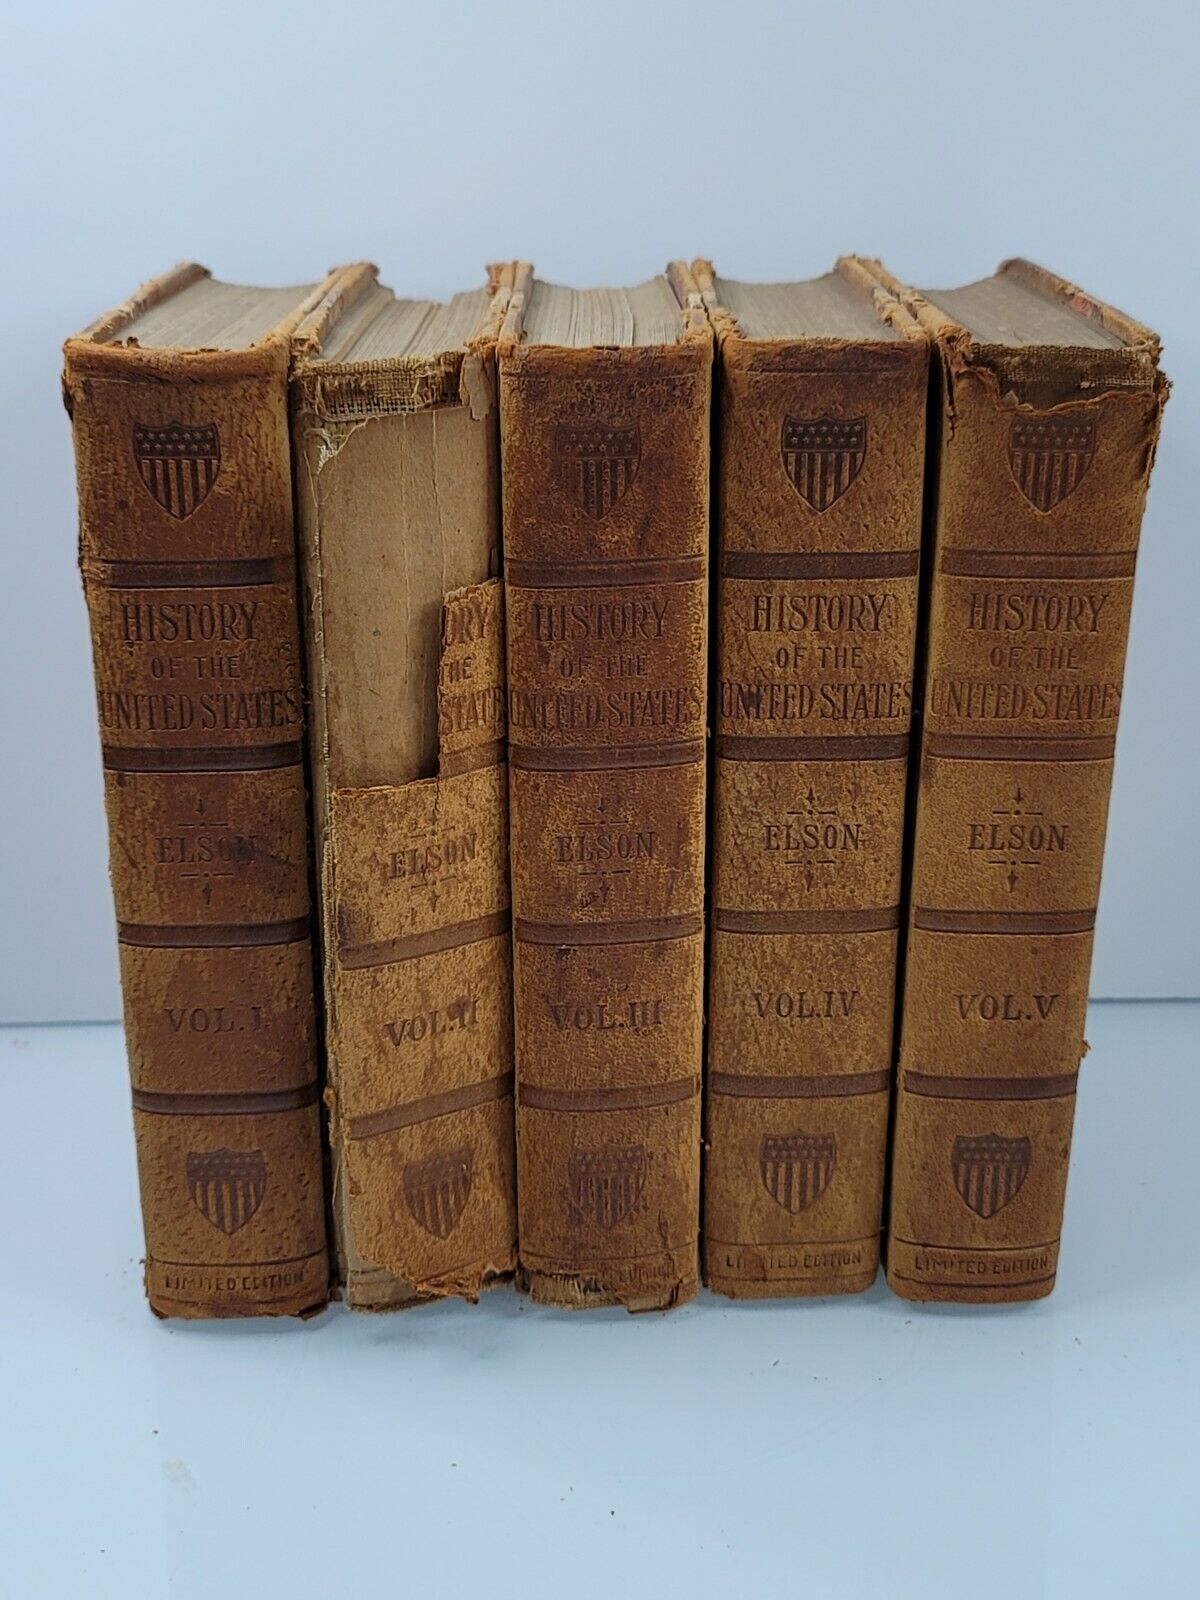 History Of The United States Henry William Elson Limited Edition Vol. 1-5 1905